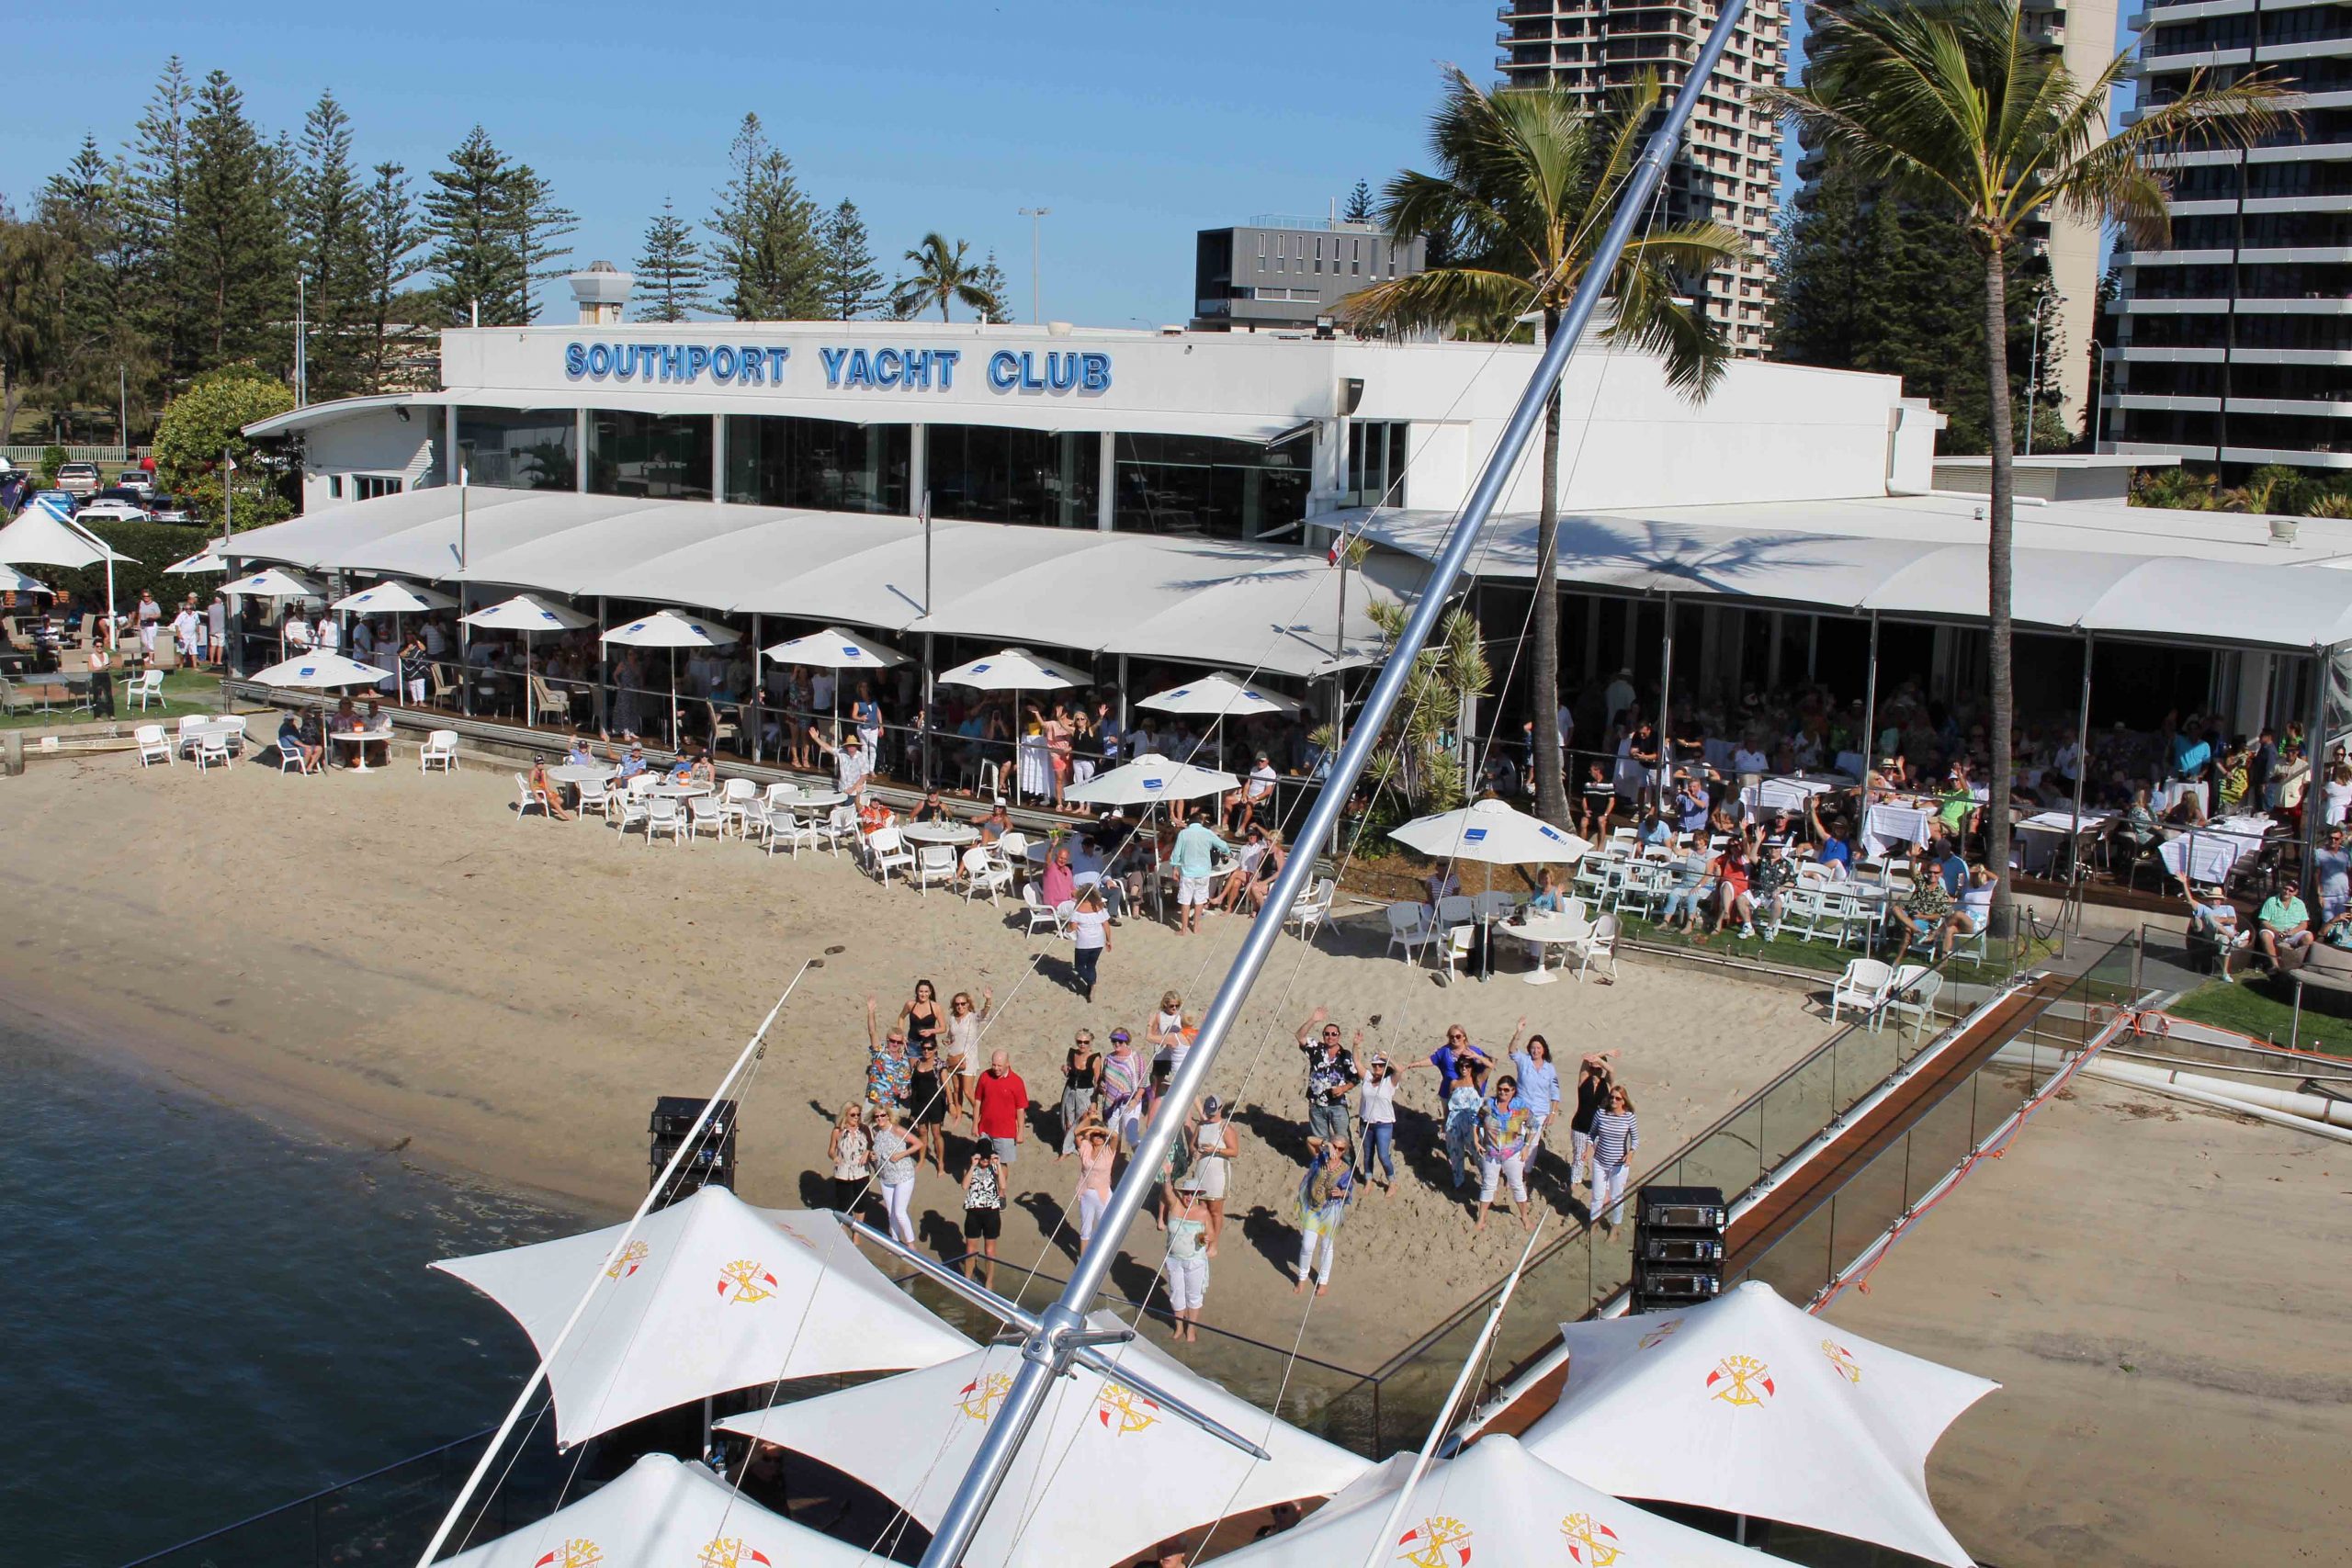 southport yacht club what's on